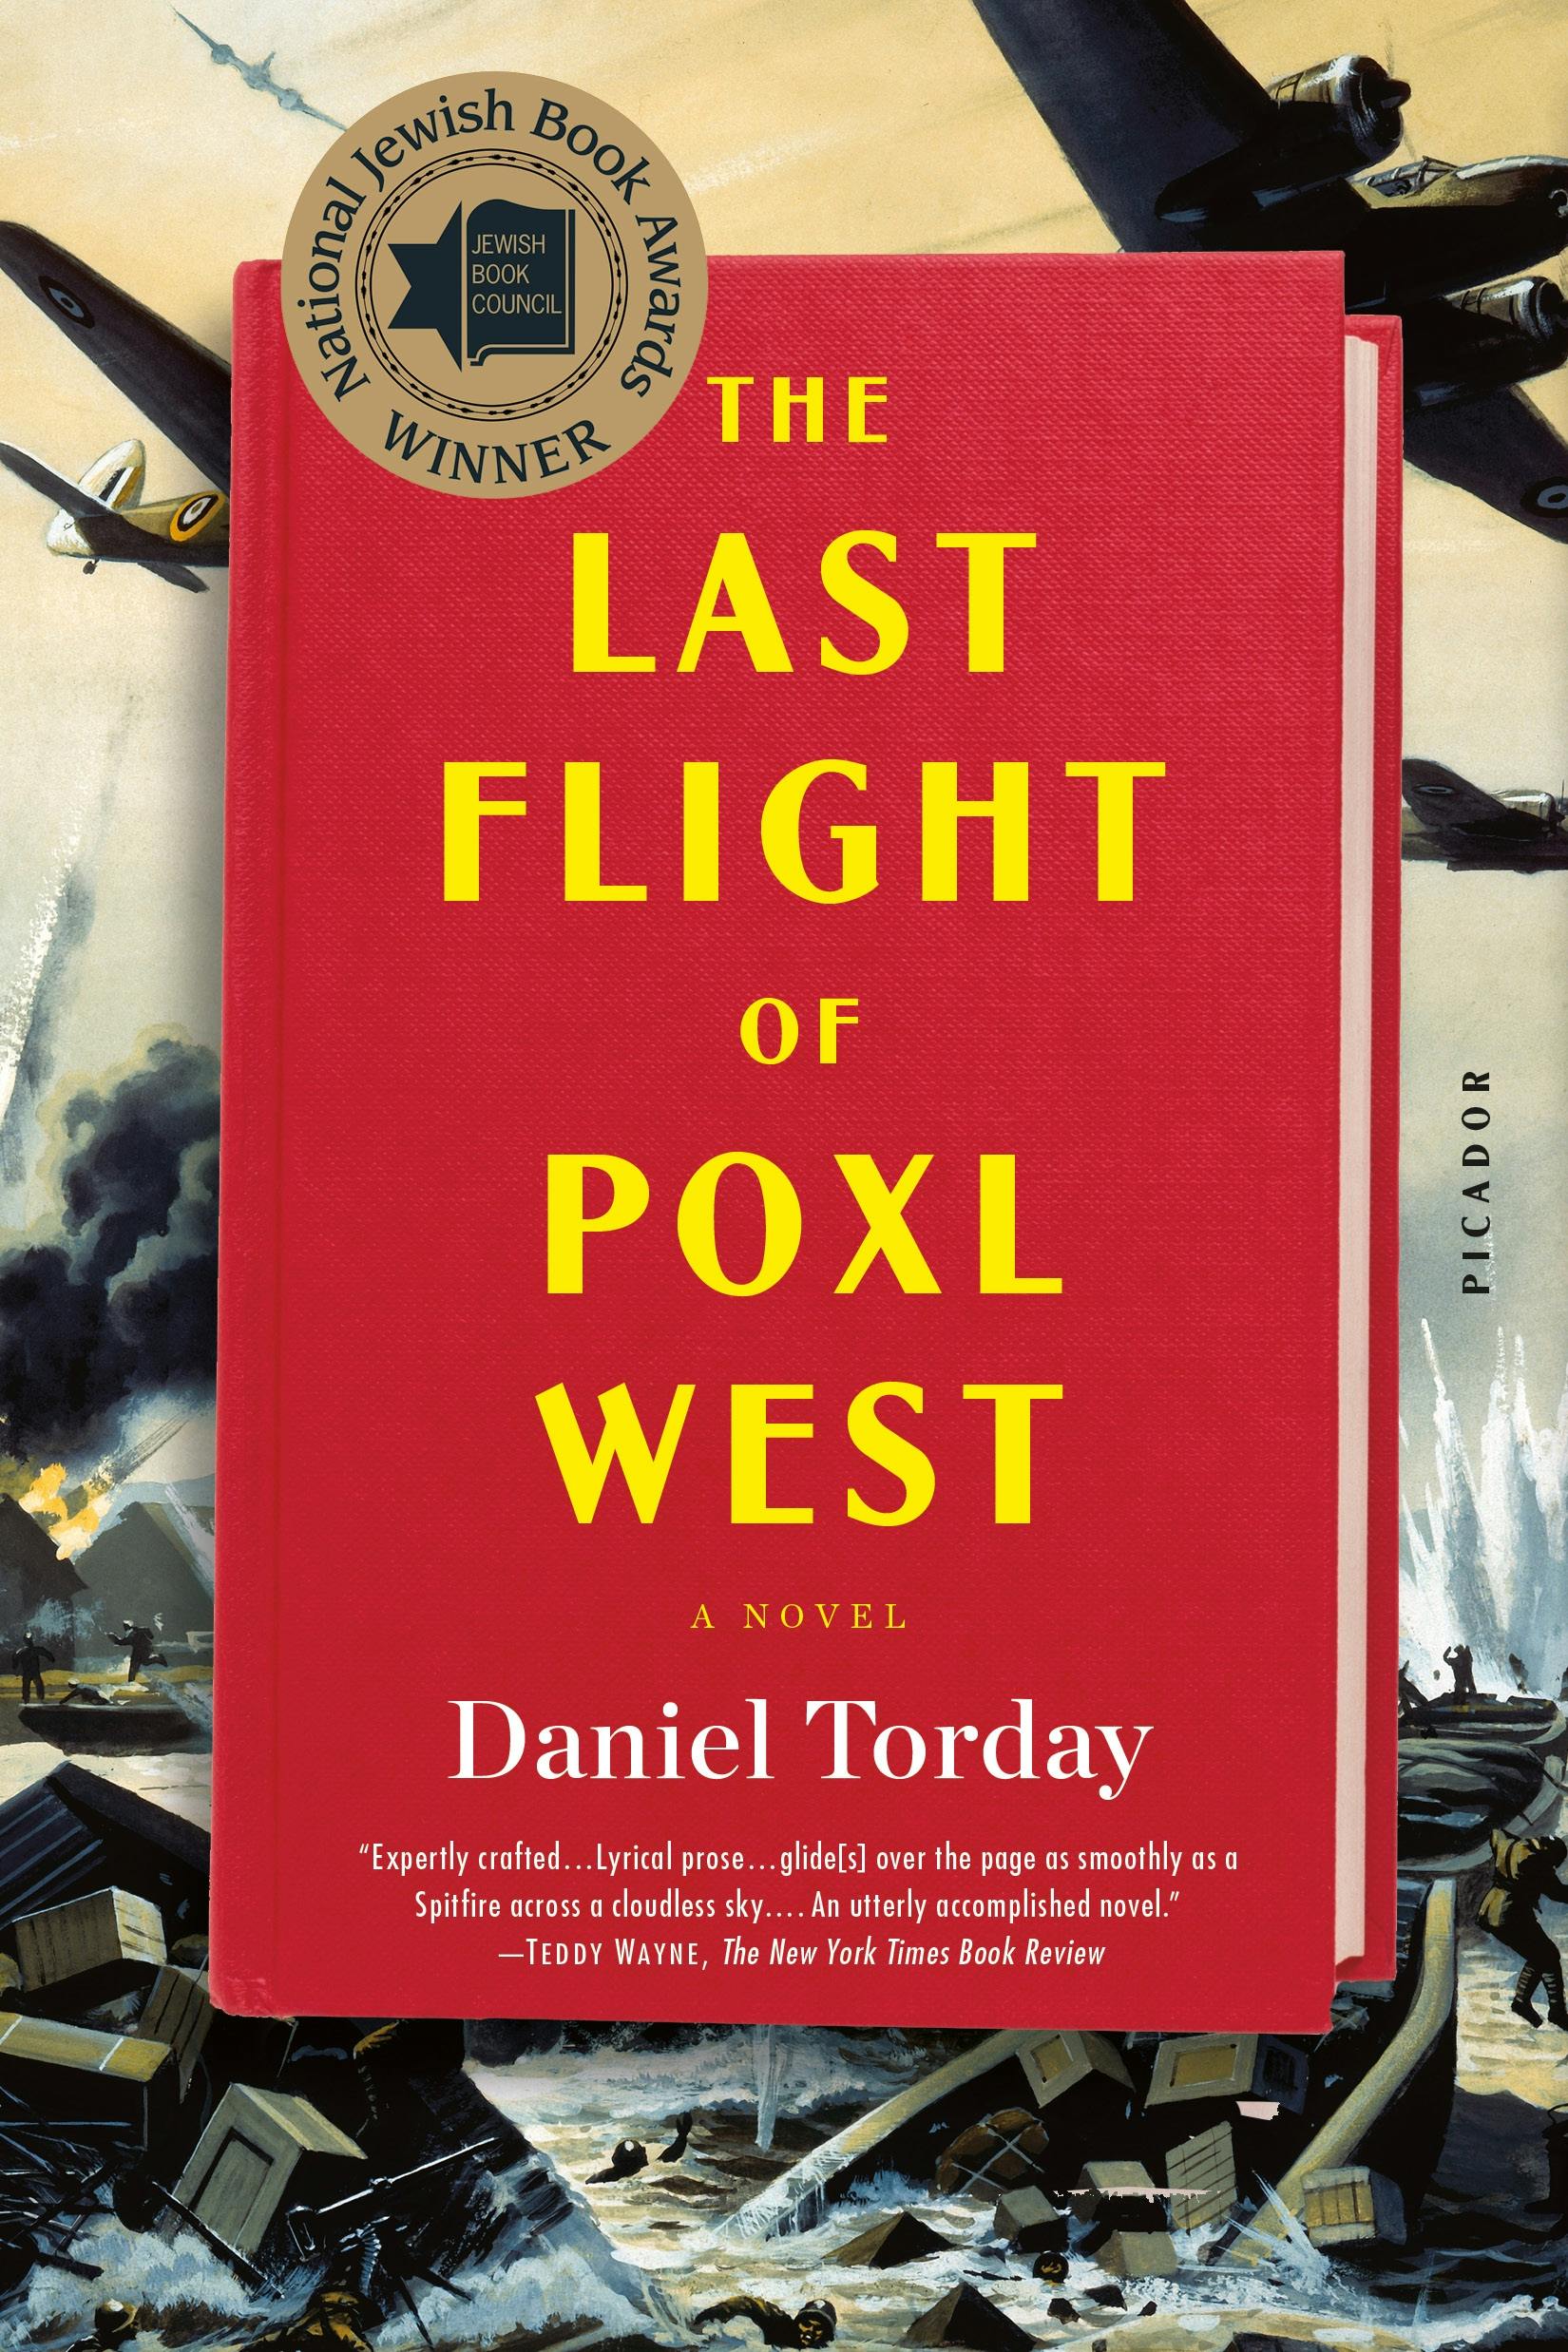 The Last Flight of Poxl West image image